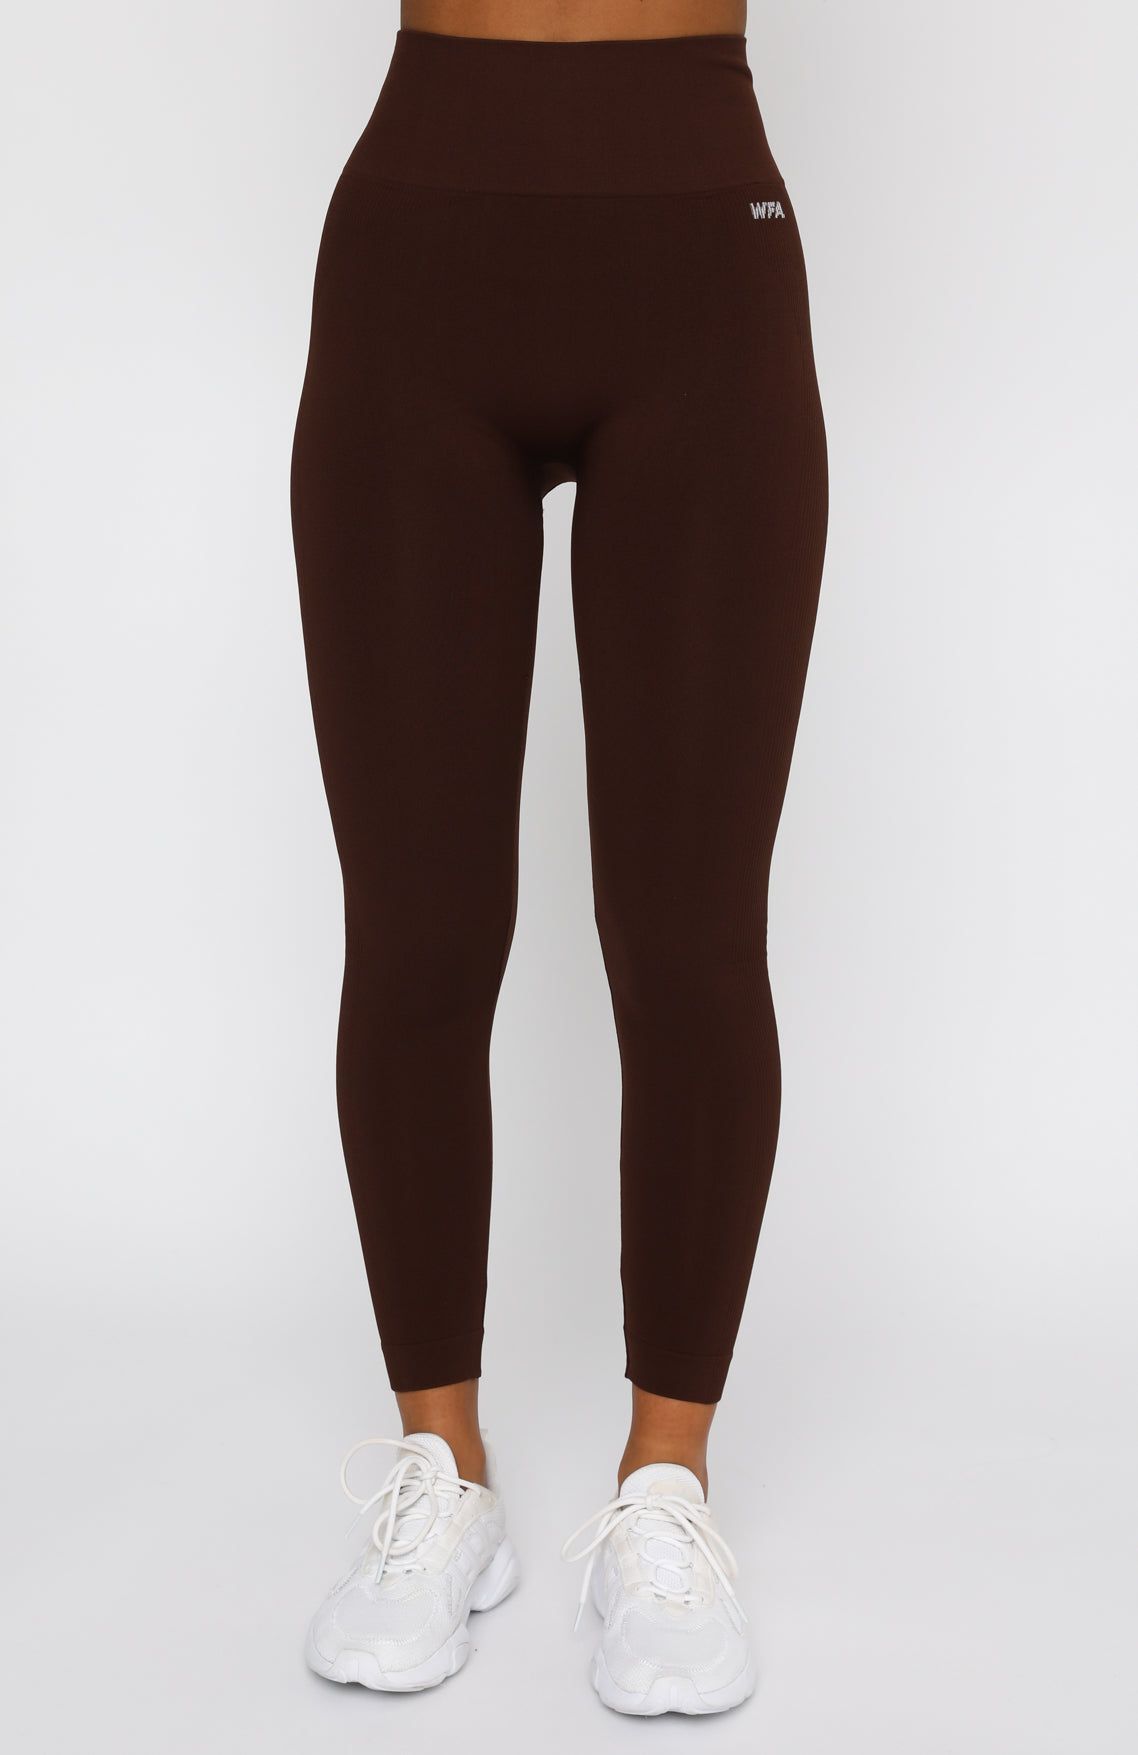 Super Soft NWT-High-Waisted Comfy Two Tone Free Size Leggings by Sofra